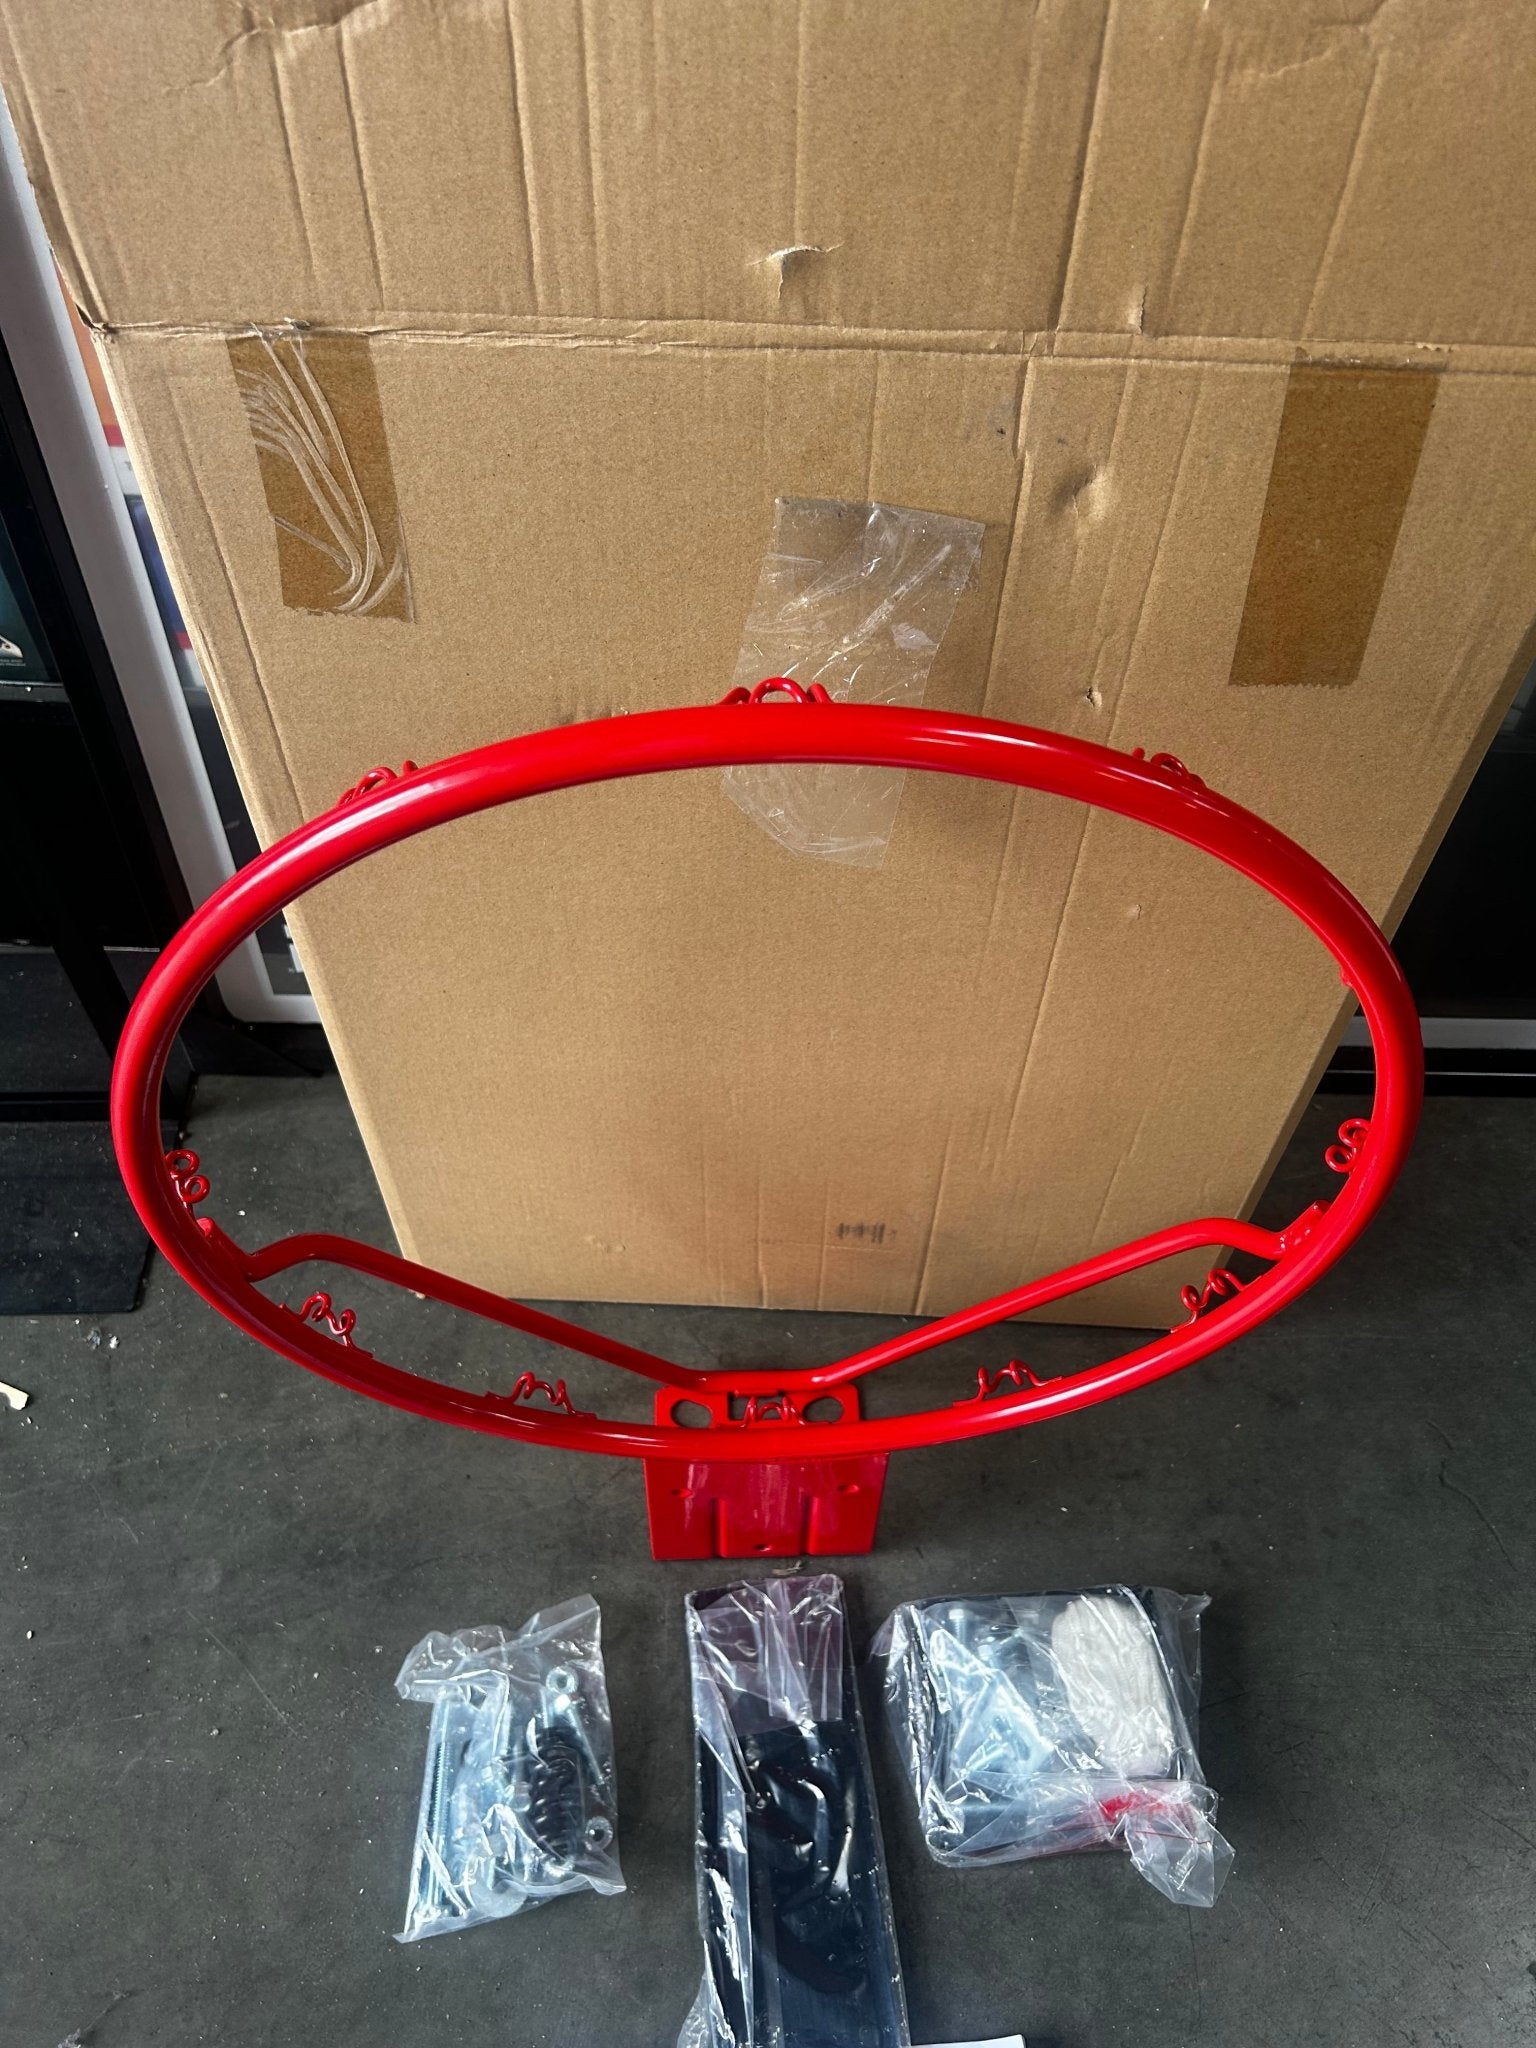 Auction for Spalding Shatter-Proof Polycarbonate Wall Mounted Basketball Backboard and Rim Combo - 2Much Liquidators